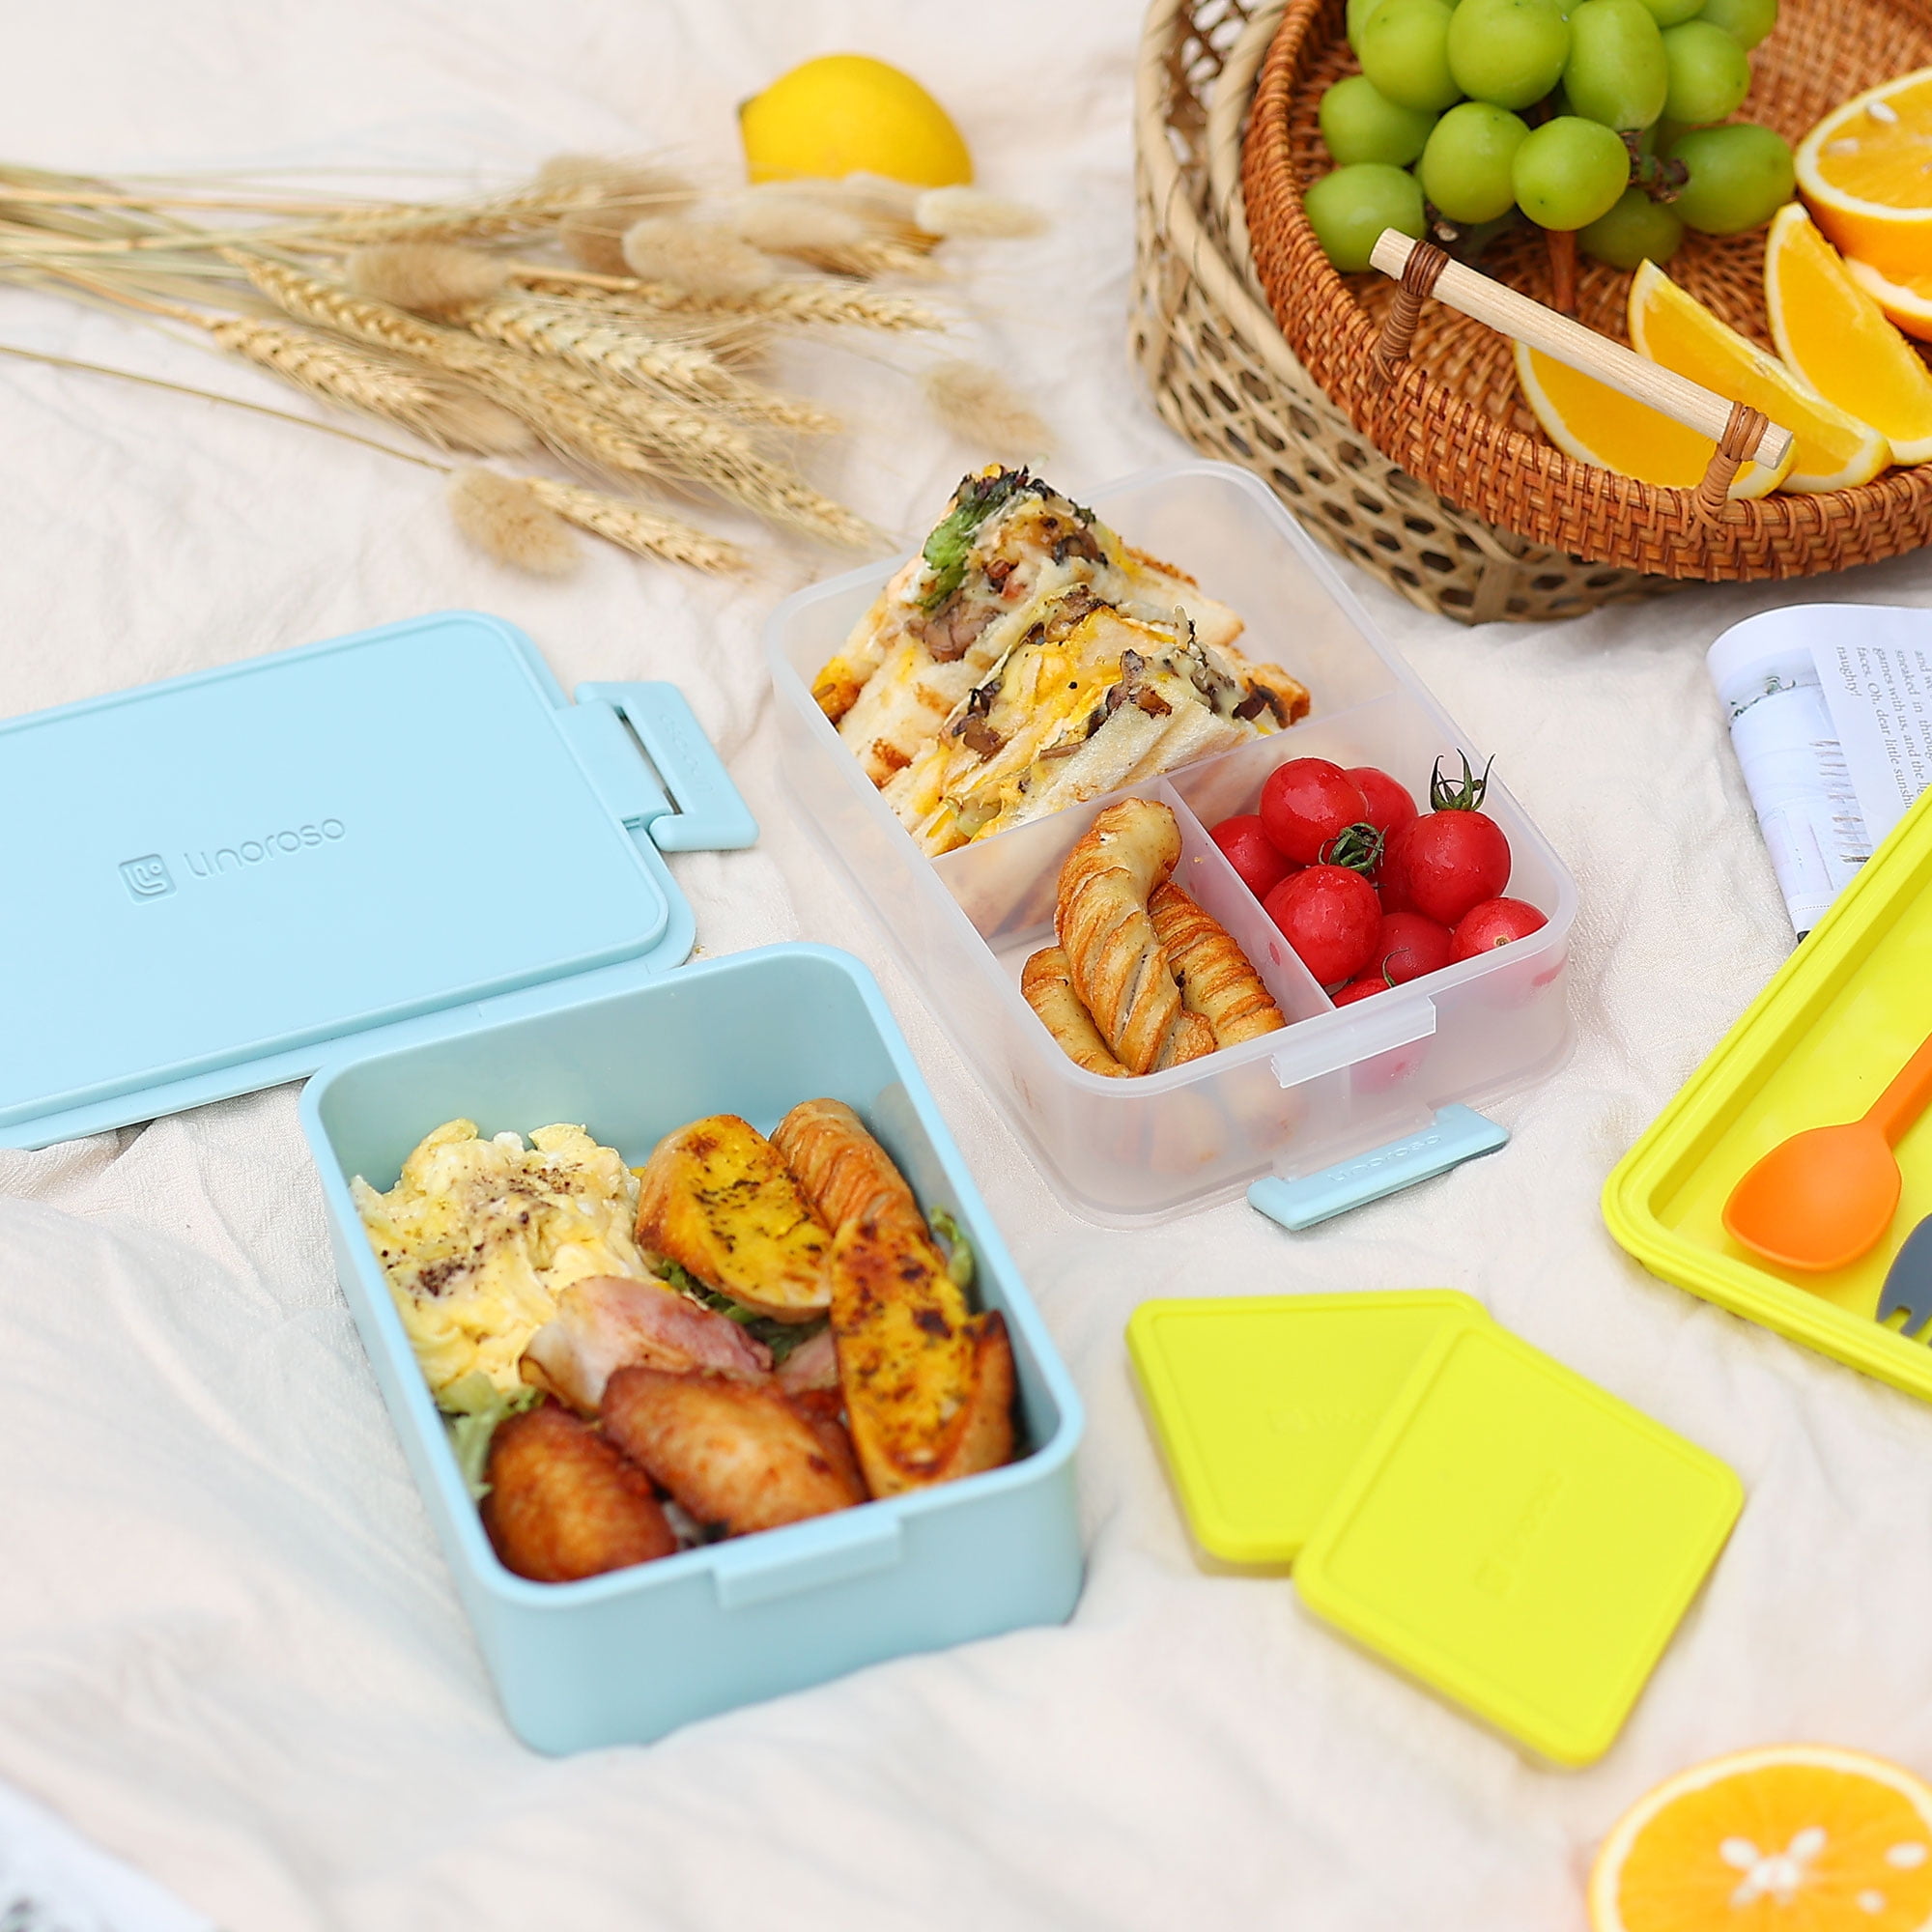 Linoroso All-in-One Stackable Bento Lunch Box Linoroso Color: Chalk White